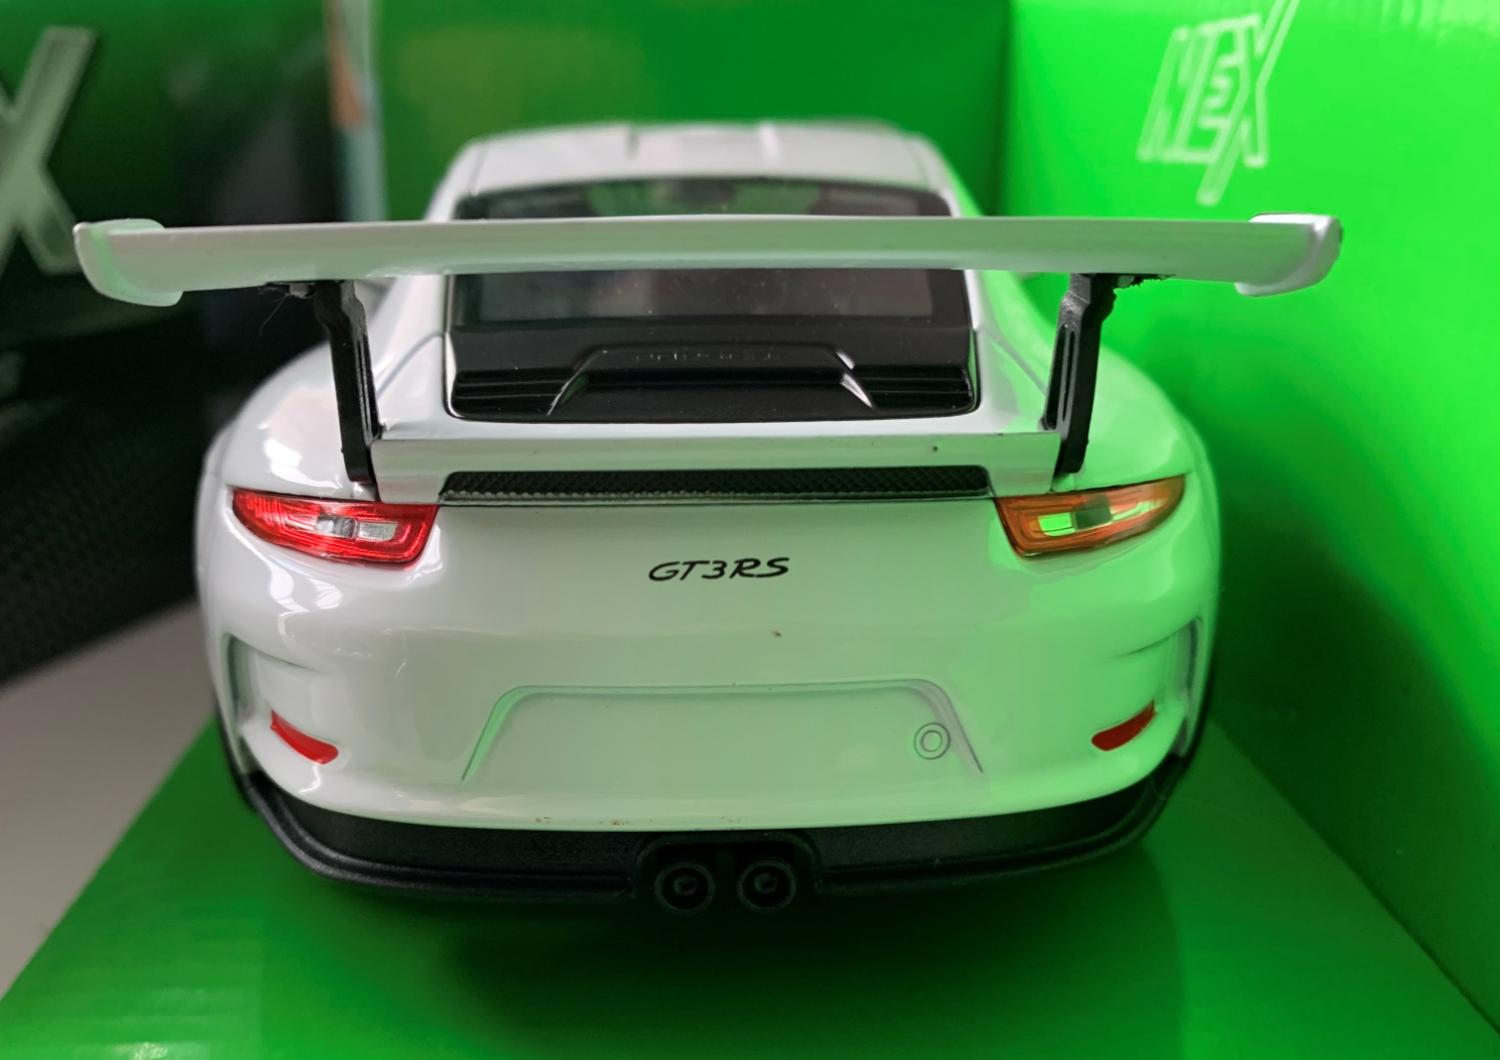 Porsche 911 GT3 RS 2016 in white 1:24 scale model from Welly